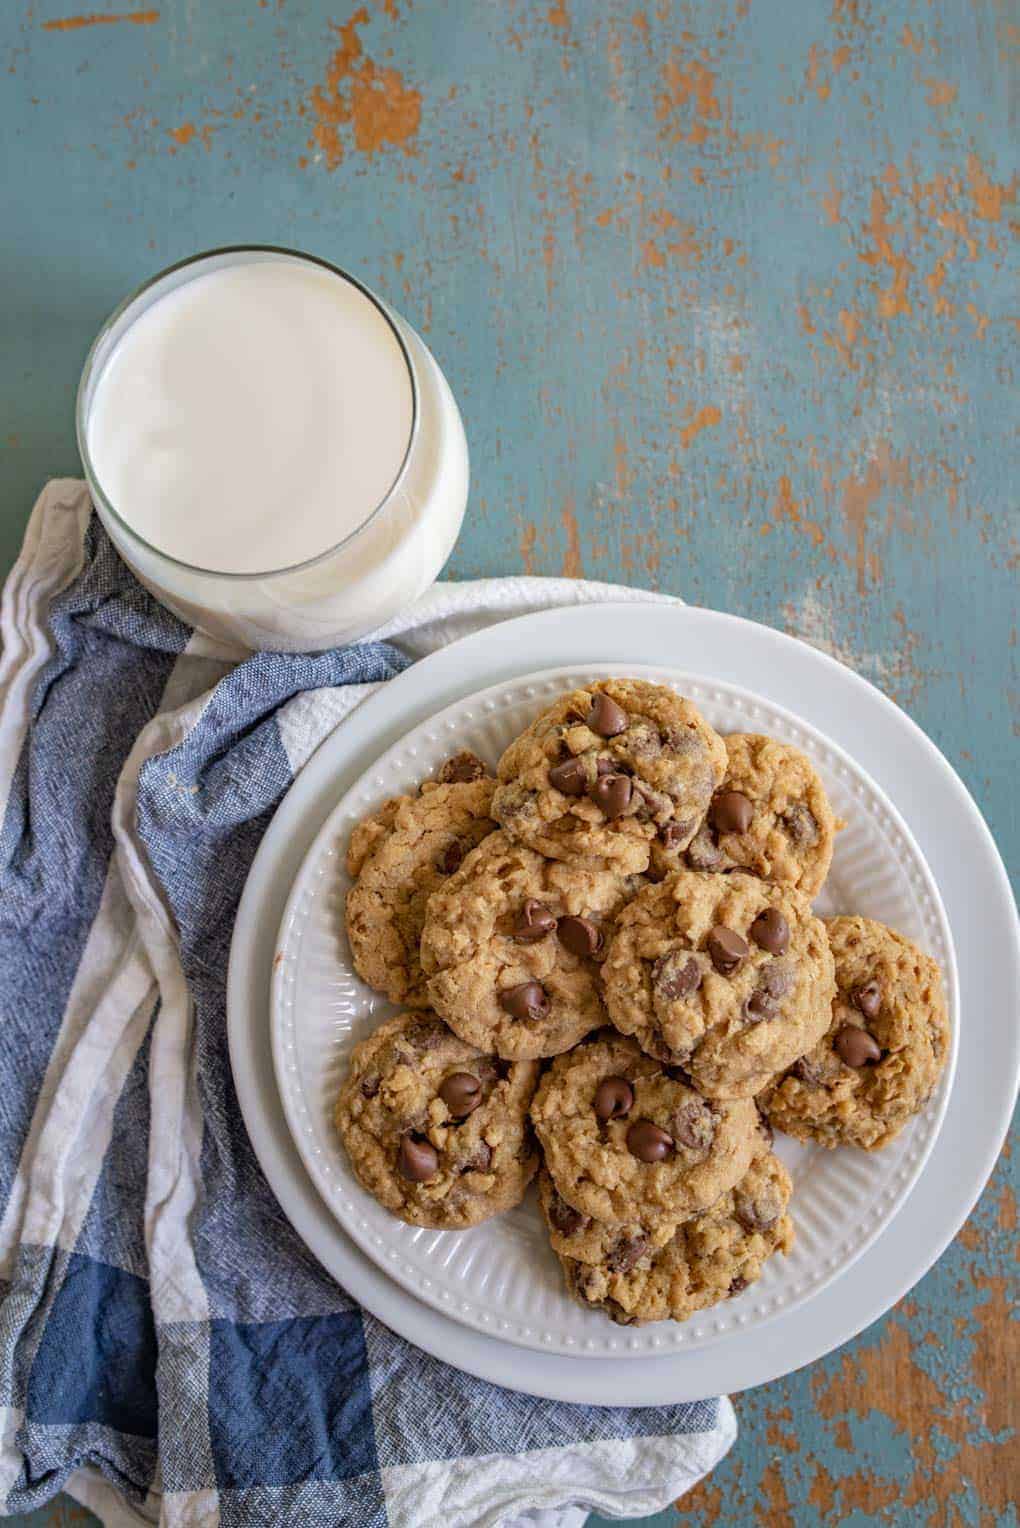 Our favorite soft and chewy homemade Oatmeal Chocolate Chip Cookies made with butter, old-fashioned rolled oats, and lots of chocolate chips!